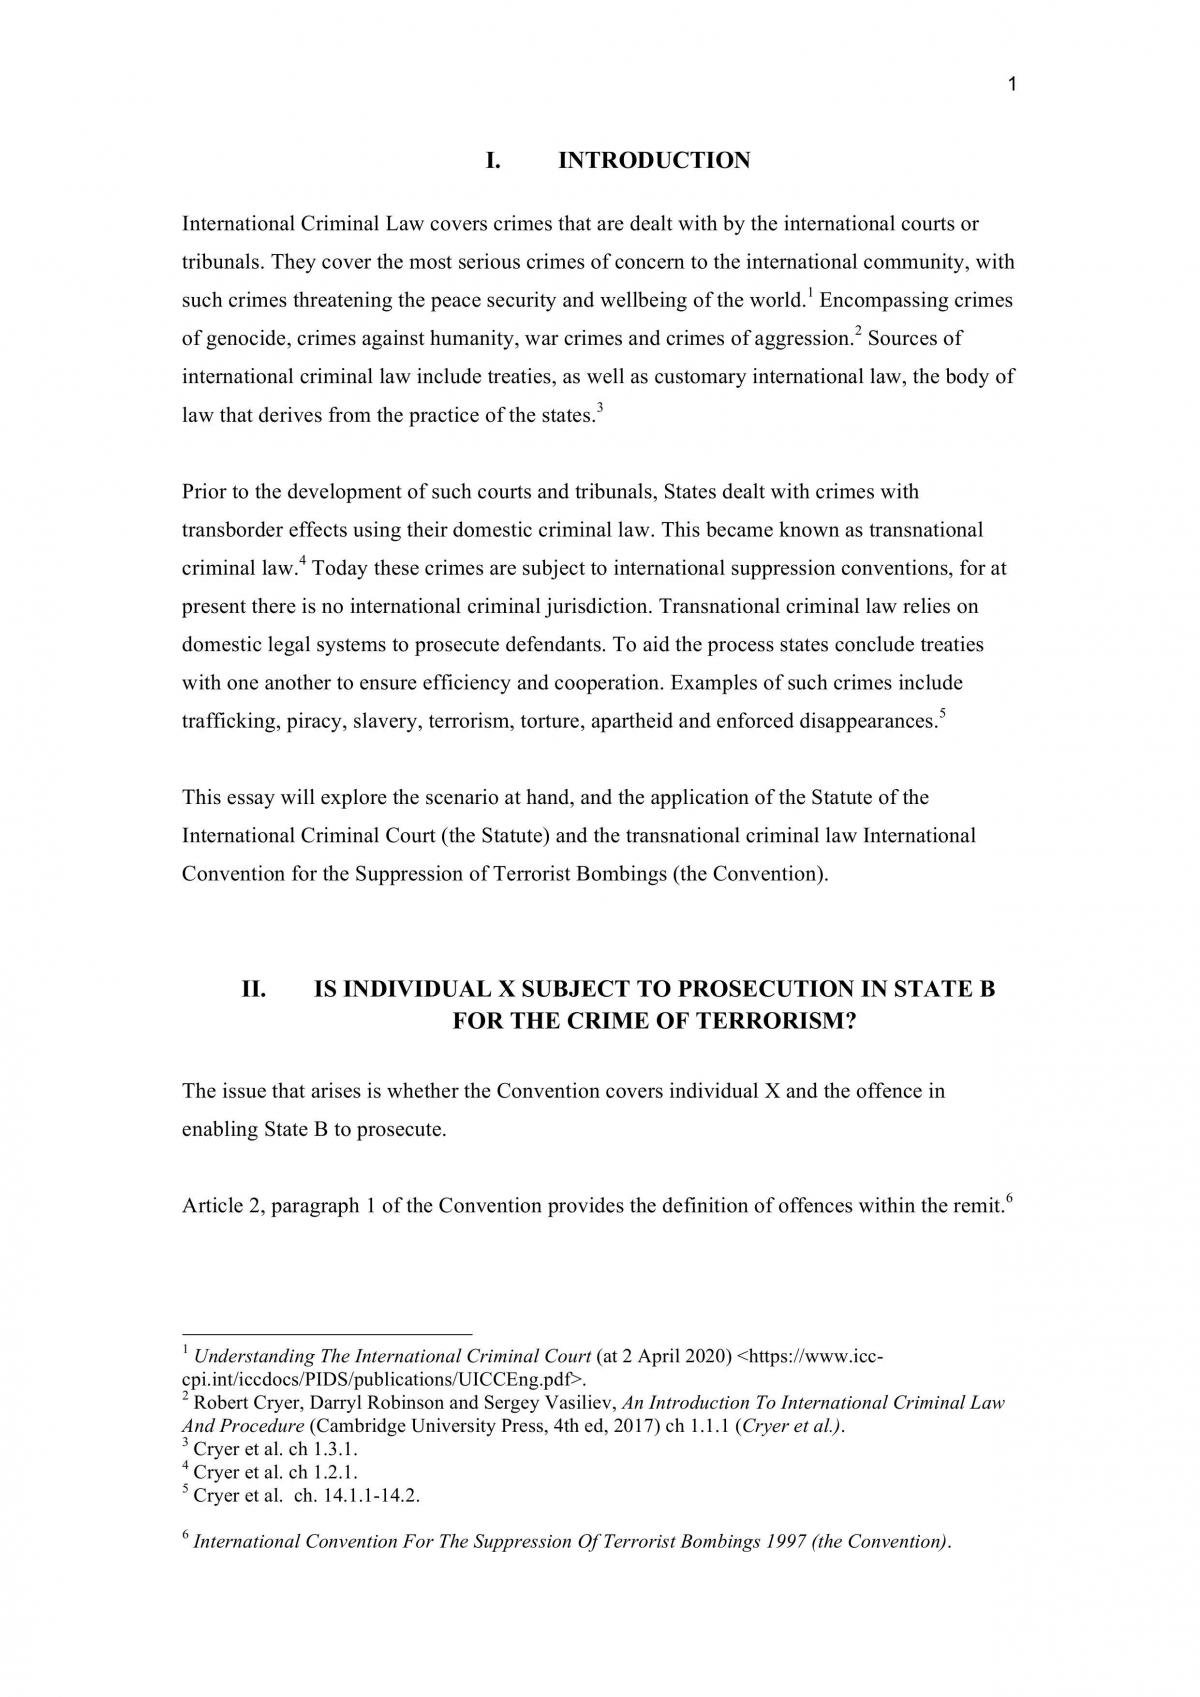 International Criminal Law - Assignment 1  - Page 1